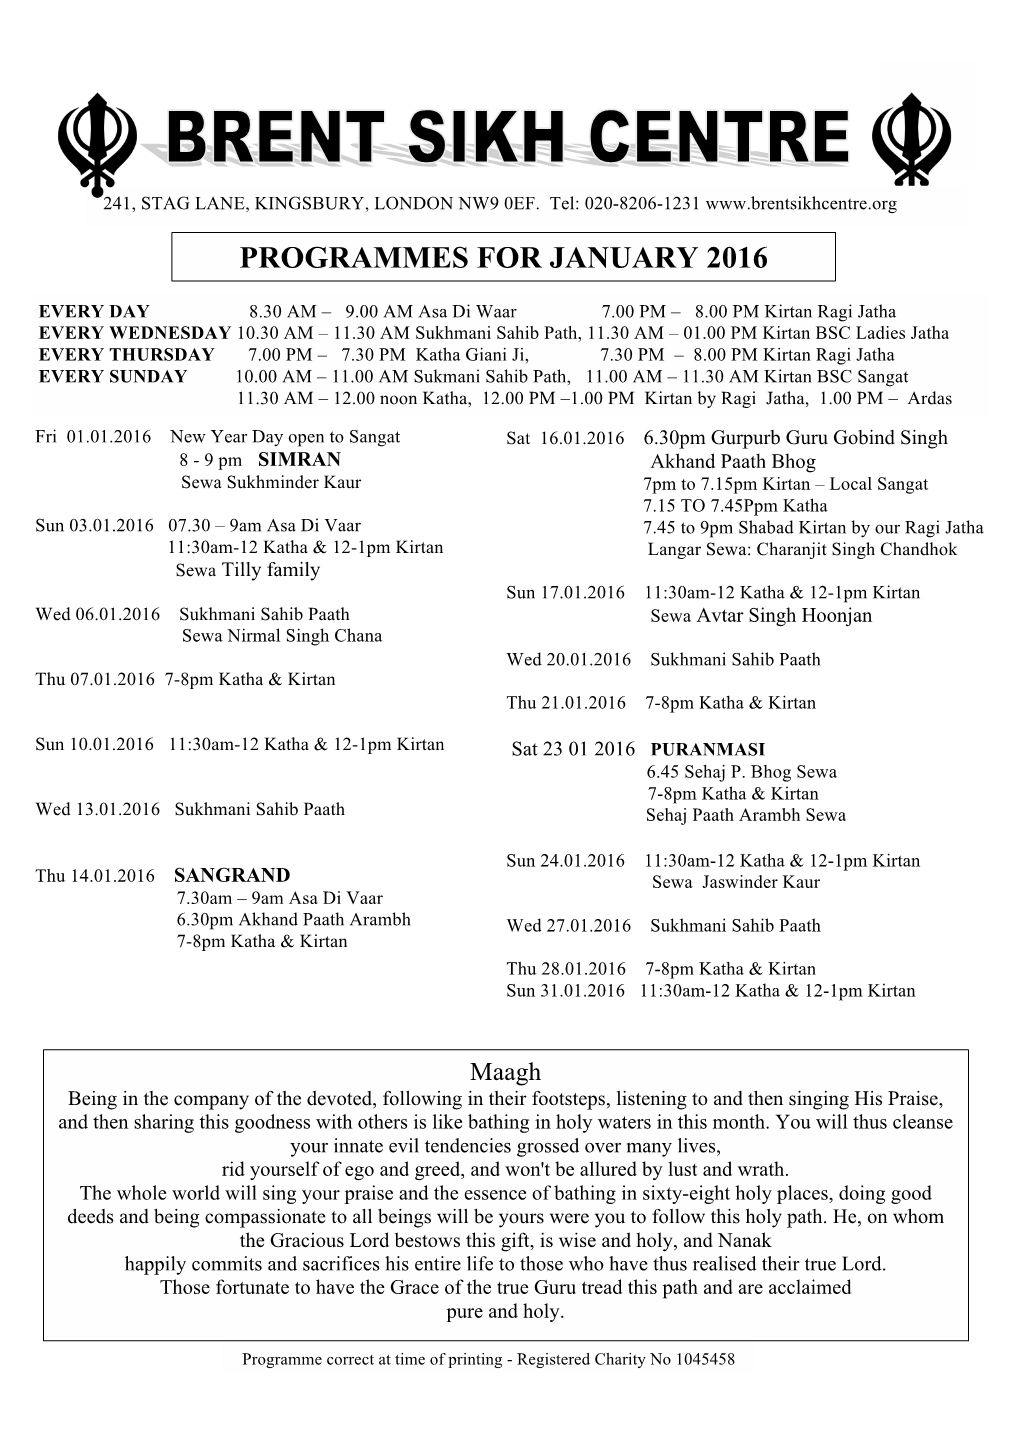 PROGRAMMES for JANUARY 2016 A